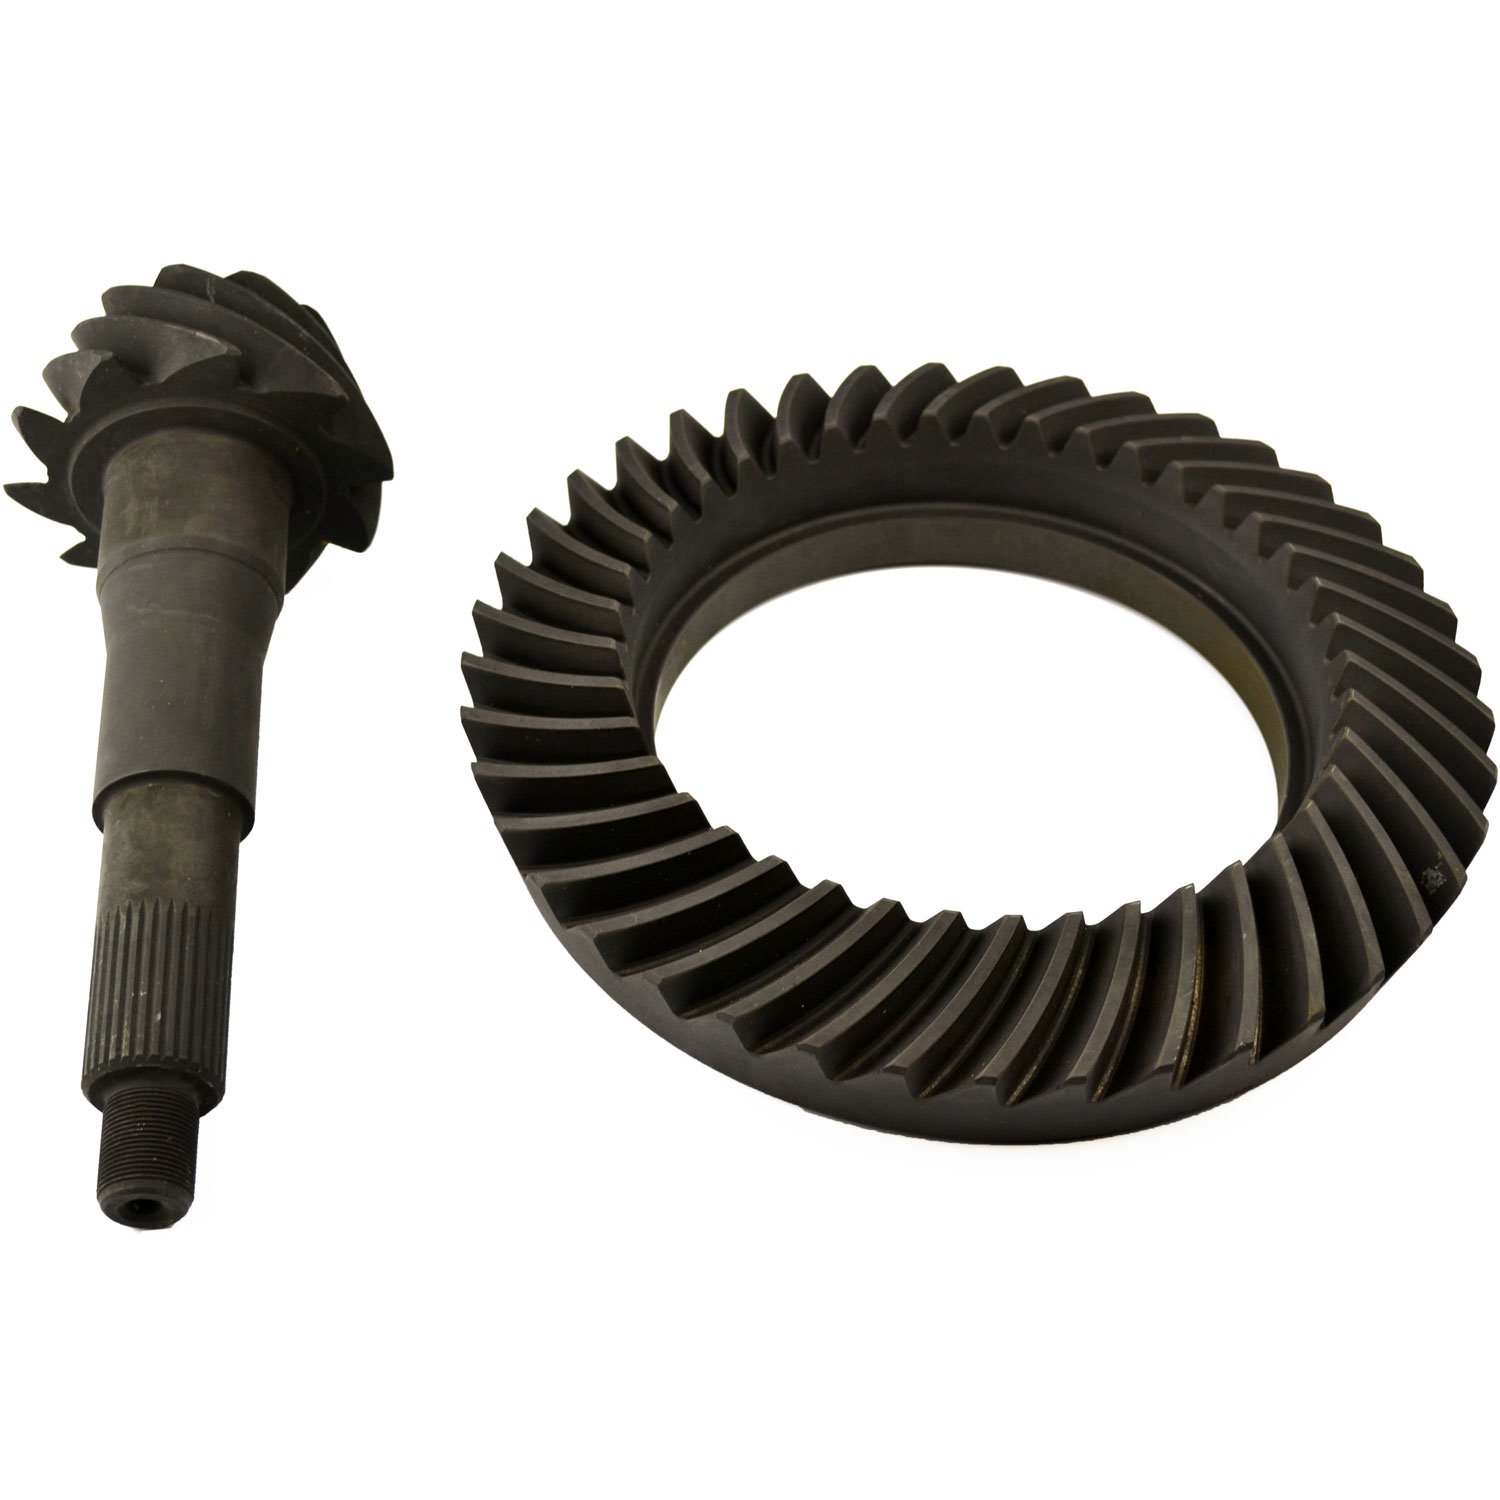 Ford 10.25" Ring & Pinion 4.10 Ratio